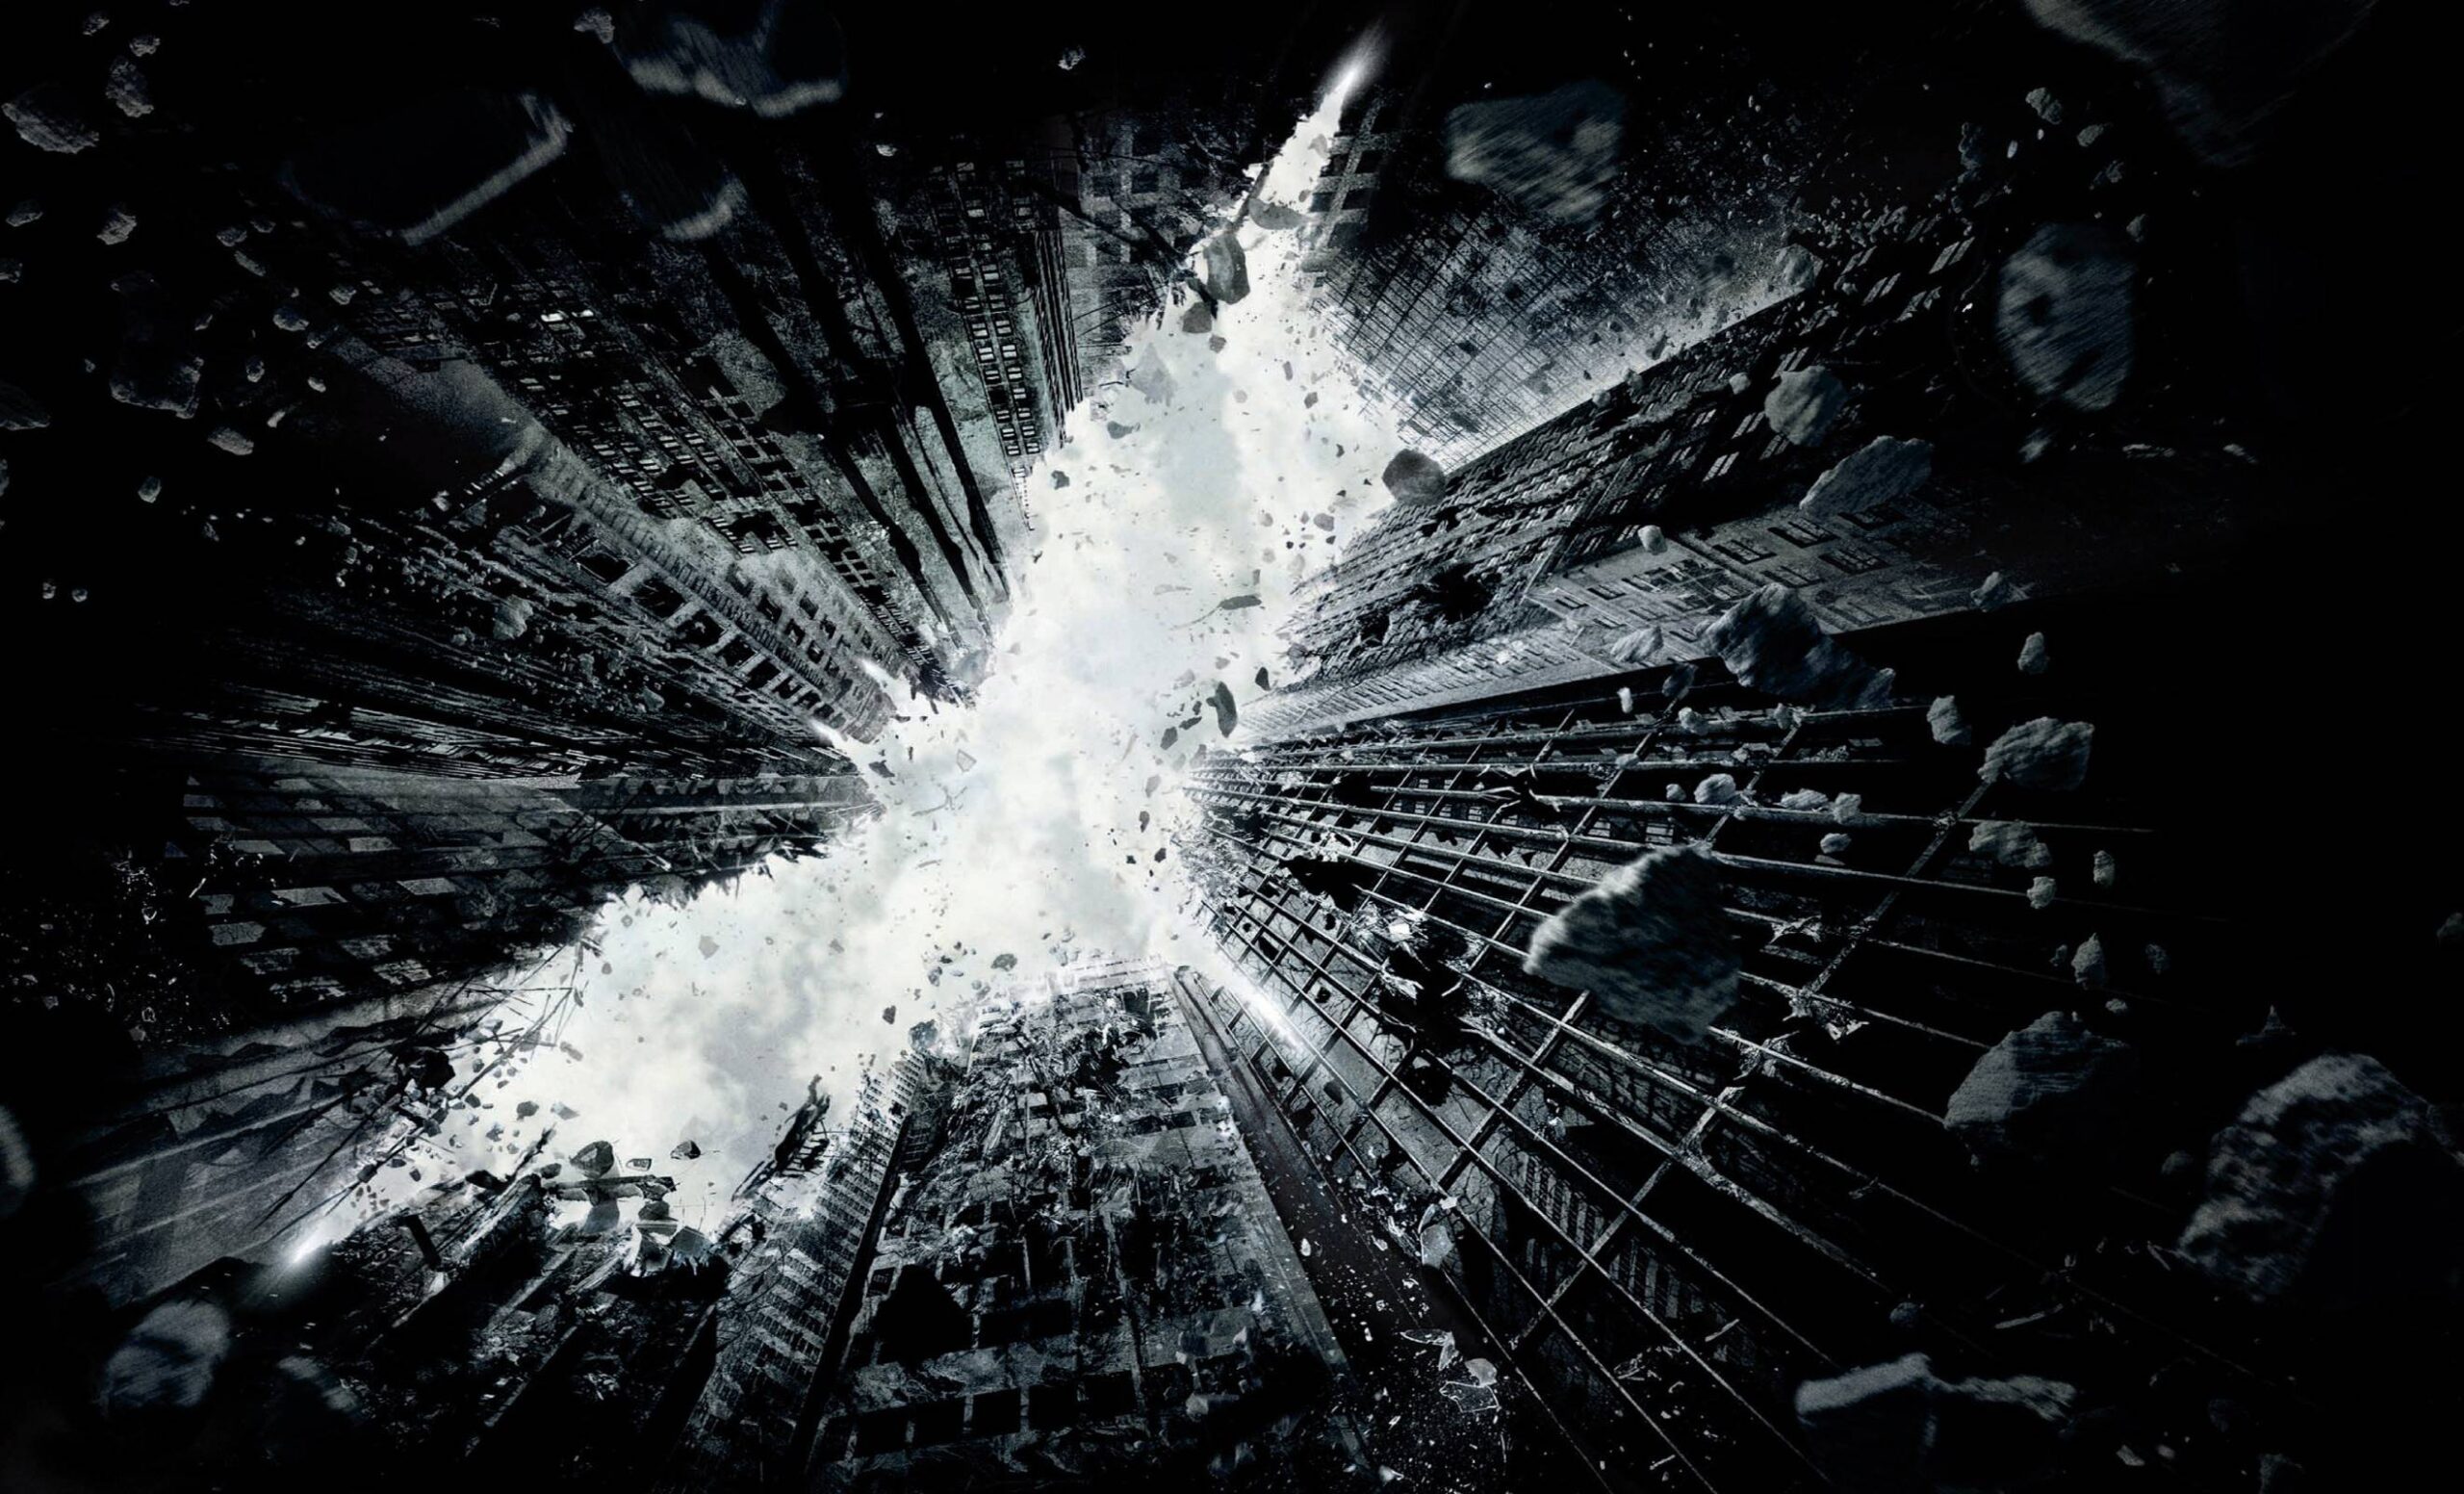 The Dark Knight Rises 2K Wallpapers and Desk 4K Backgrounds